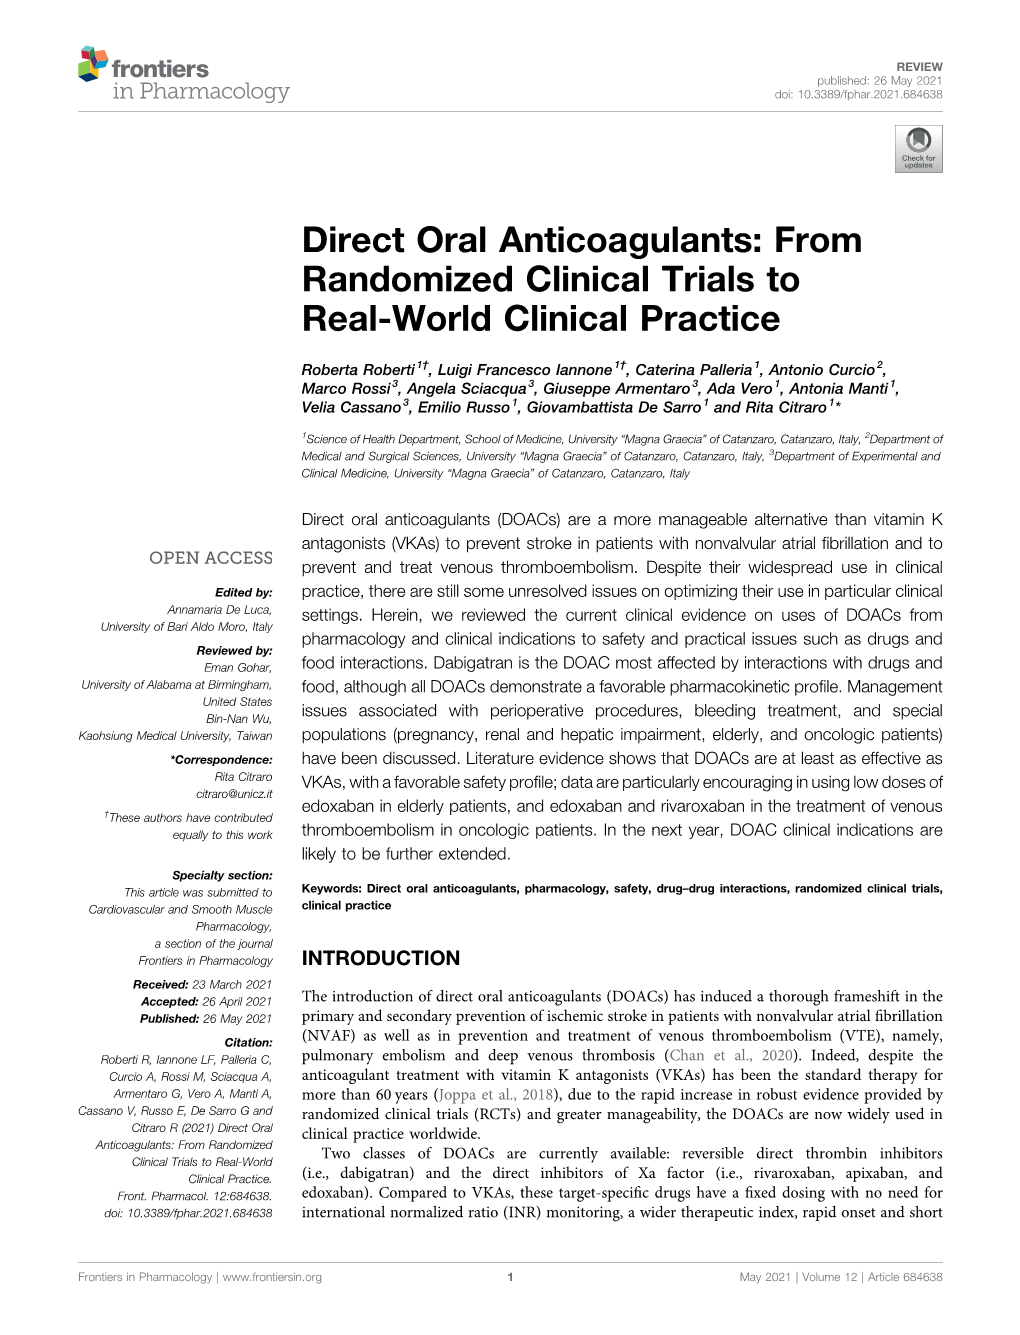 Direct Oral Anticoagulants: from Randomized Clinical Trials to Real-World Clinical Practice